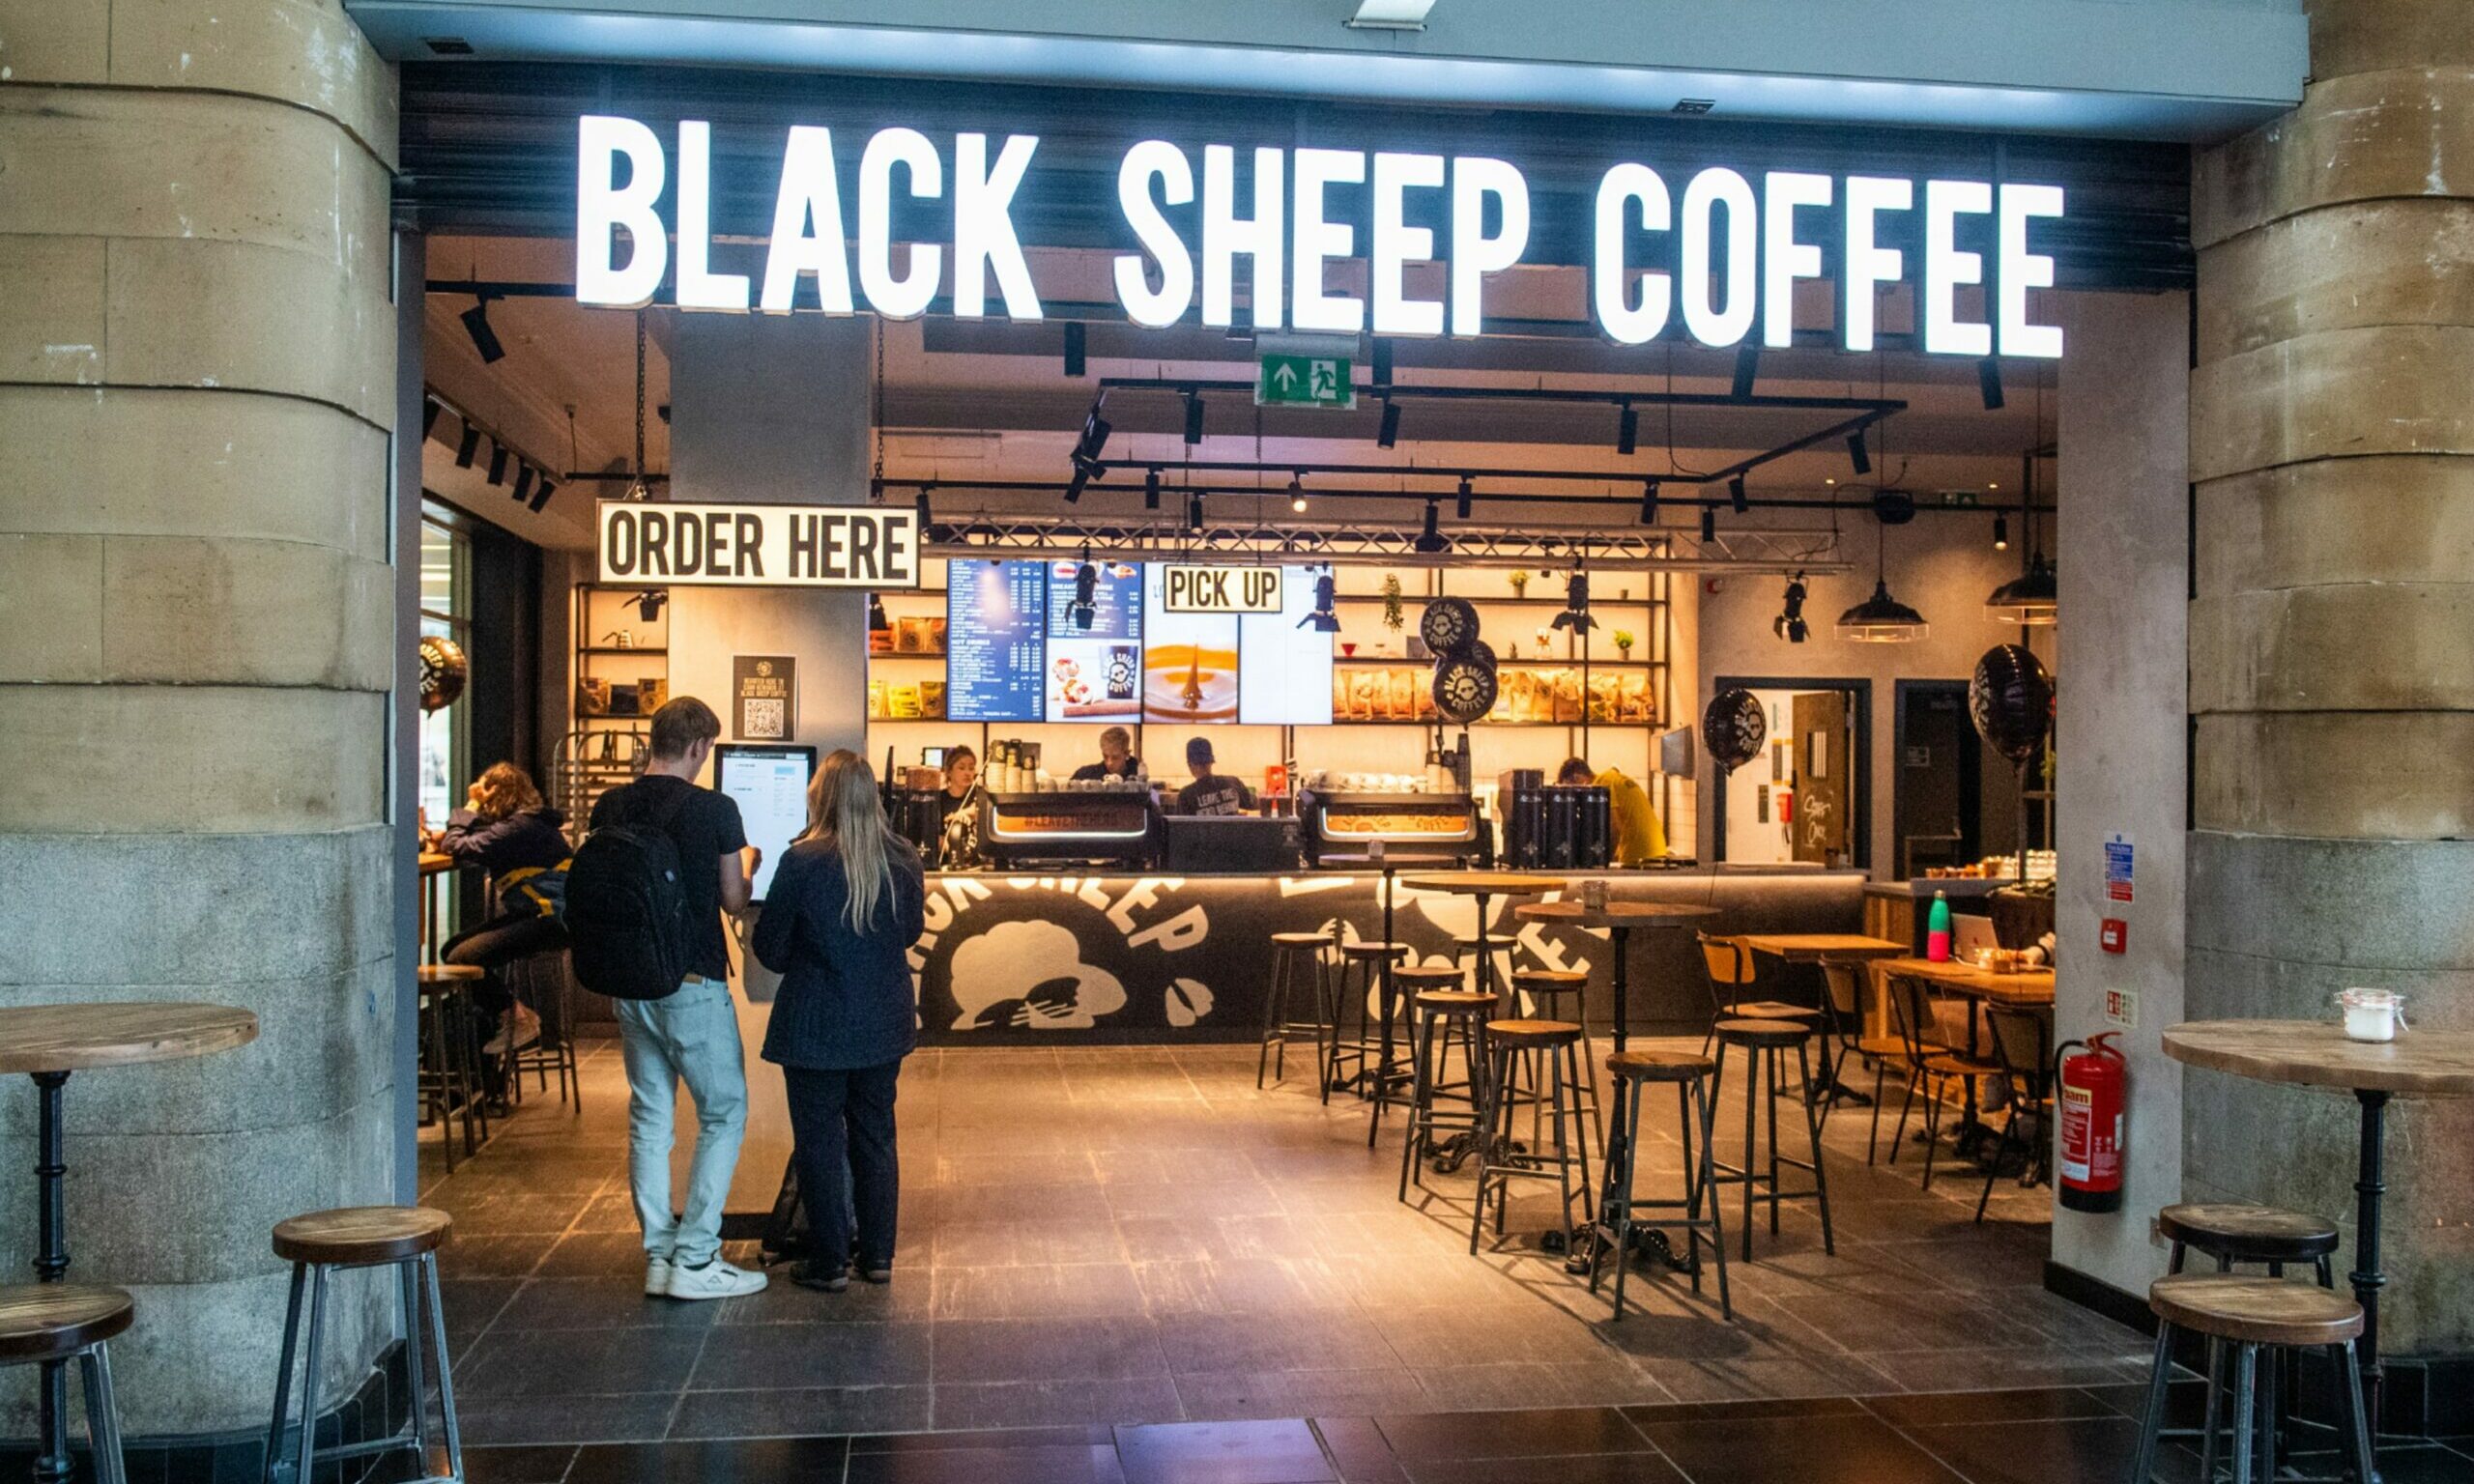 The Black Sheep Coffee branch at Union Square, which opened at the time that Caffe Nero closed its branch on the junction of Union Street and Market Street